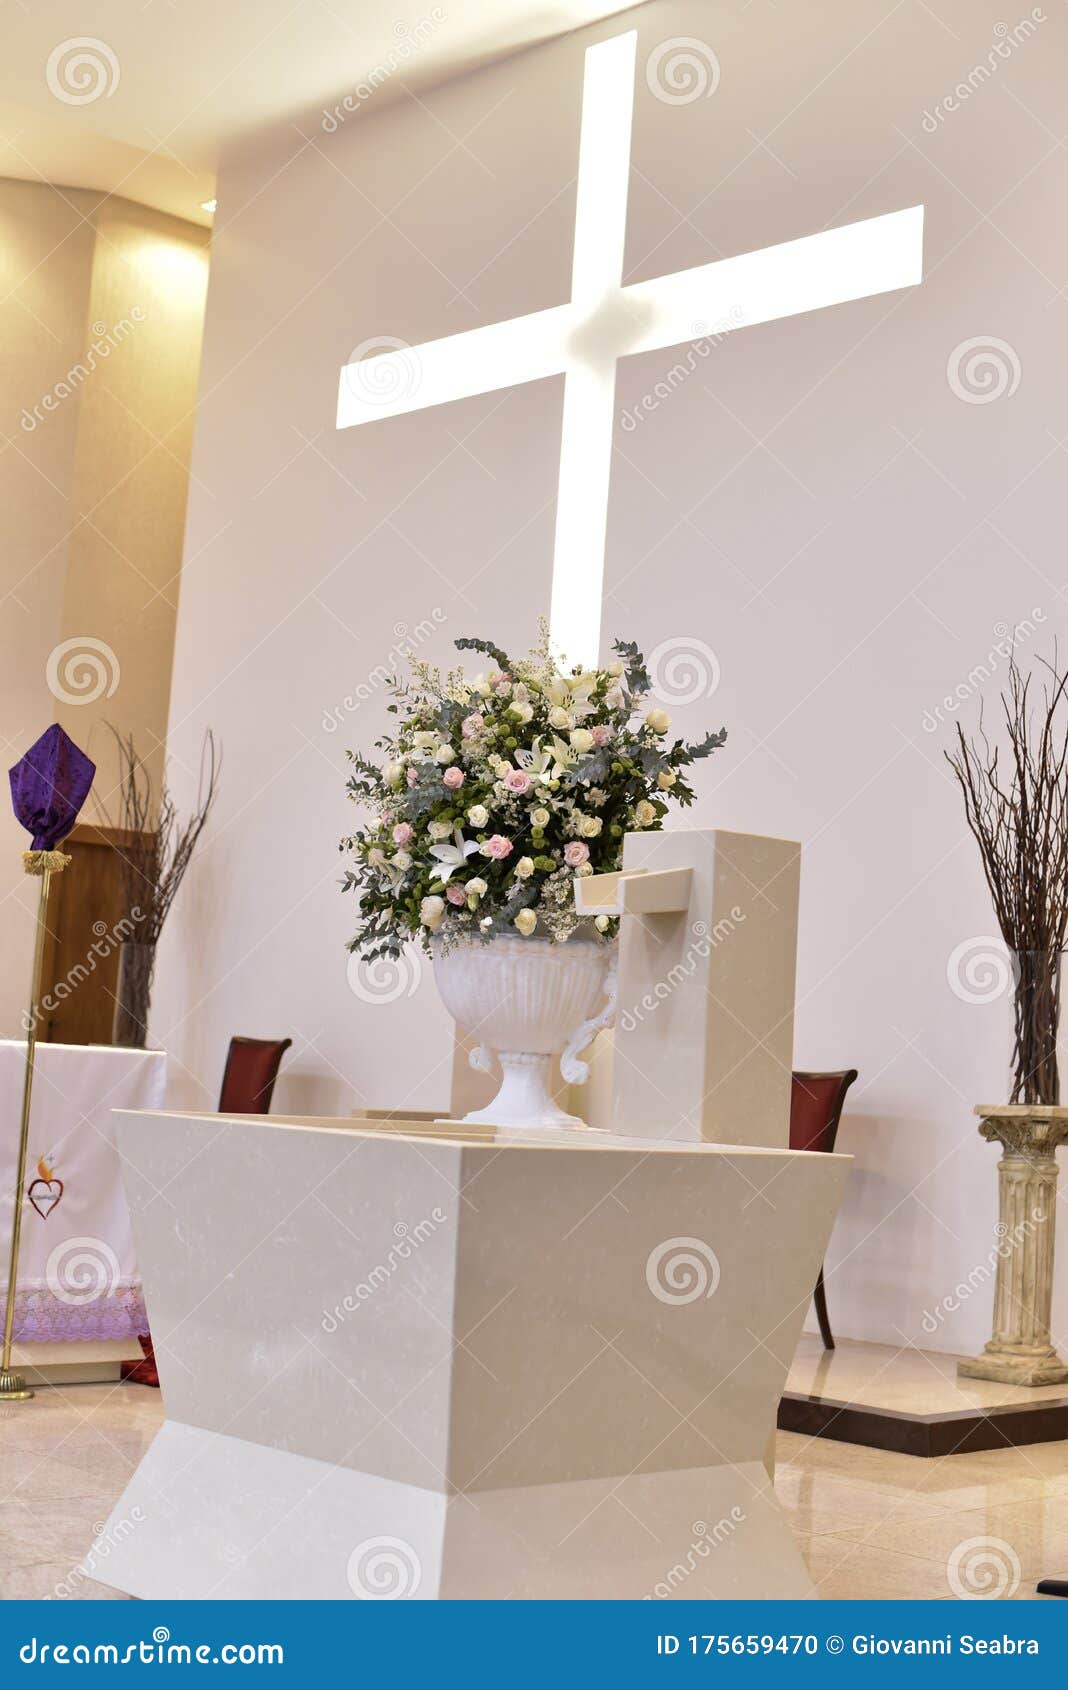 Catholic Church Prayer Altar with Flower Arrangements and Cross in the  Background Stock Photo - Image of inside, interior: 175659470